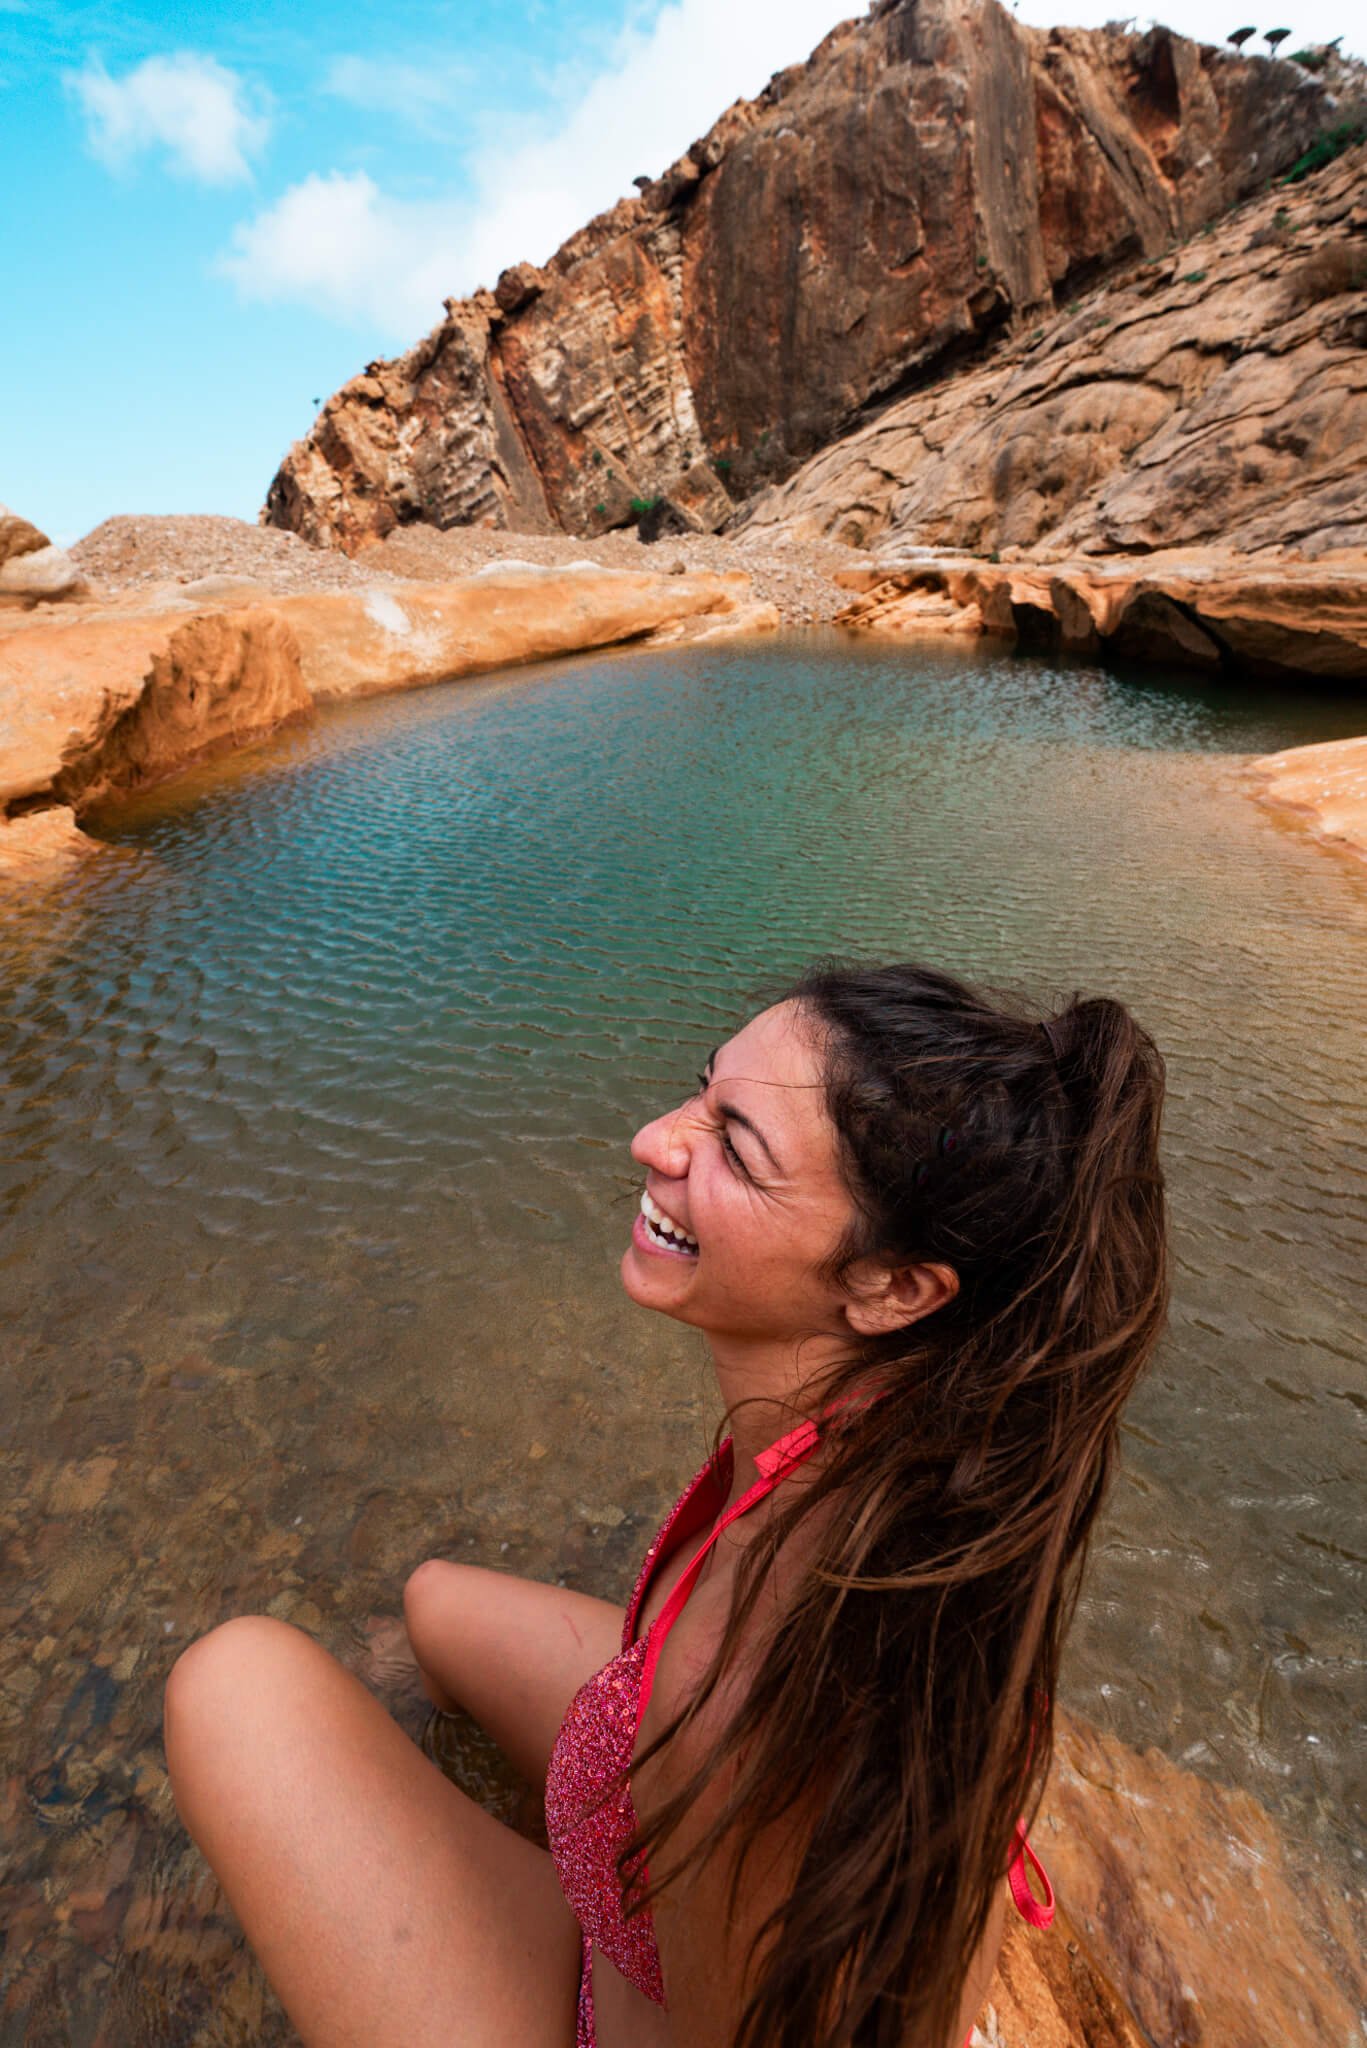 Natural pool in Socotra, Socotra island tour